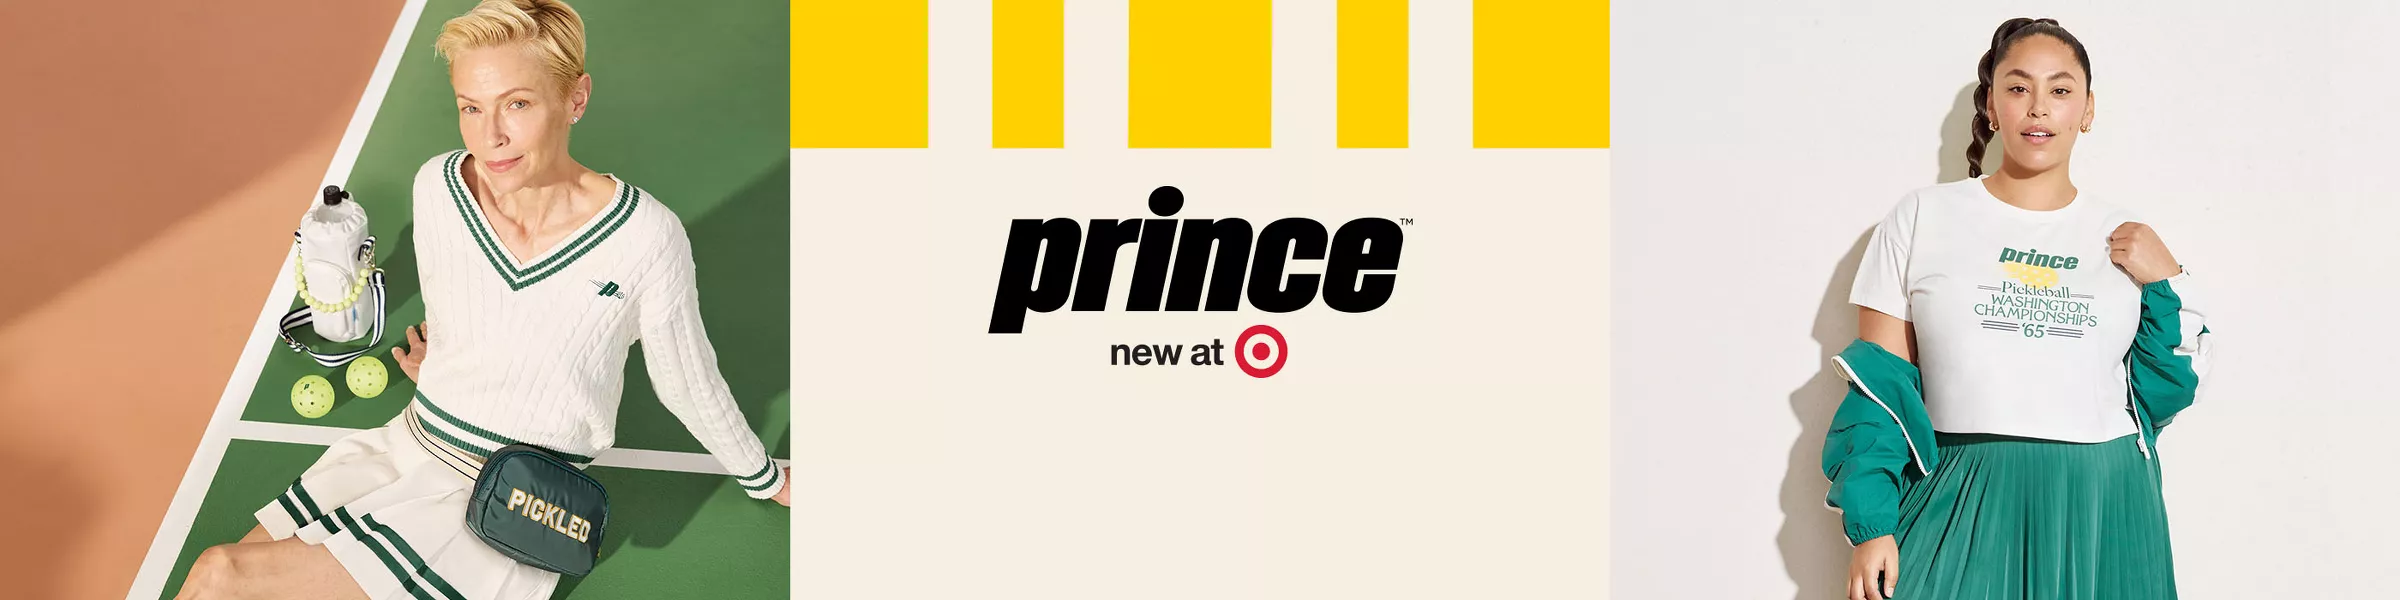 Prince
New & only at Target